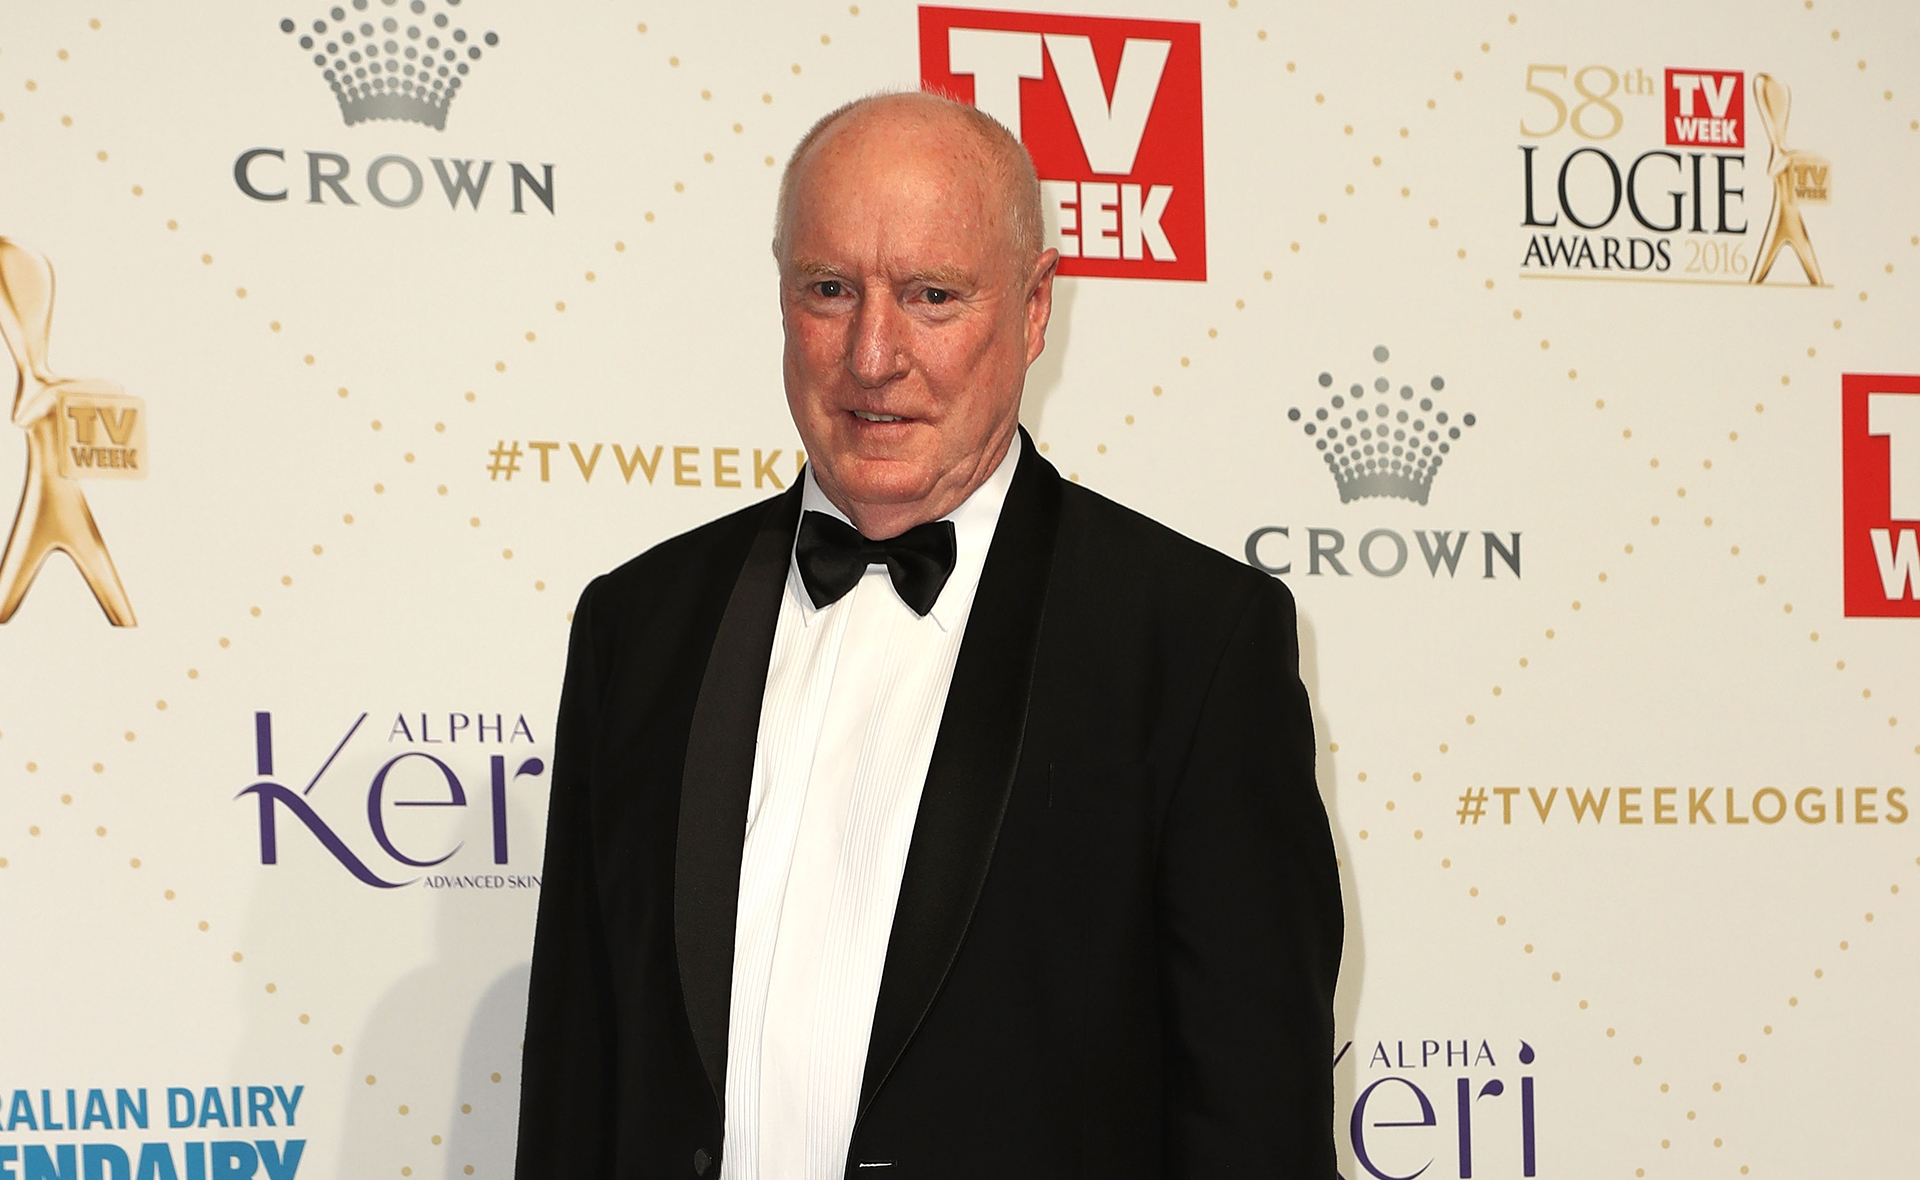 Aussie icon Ray Meagher shared more details about his surprise surgical procedure and retirement plans